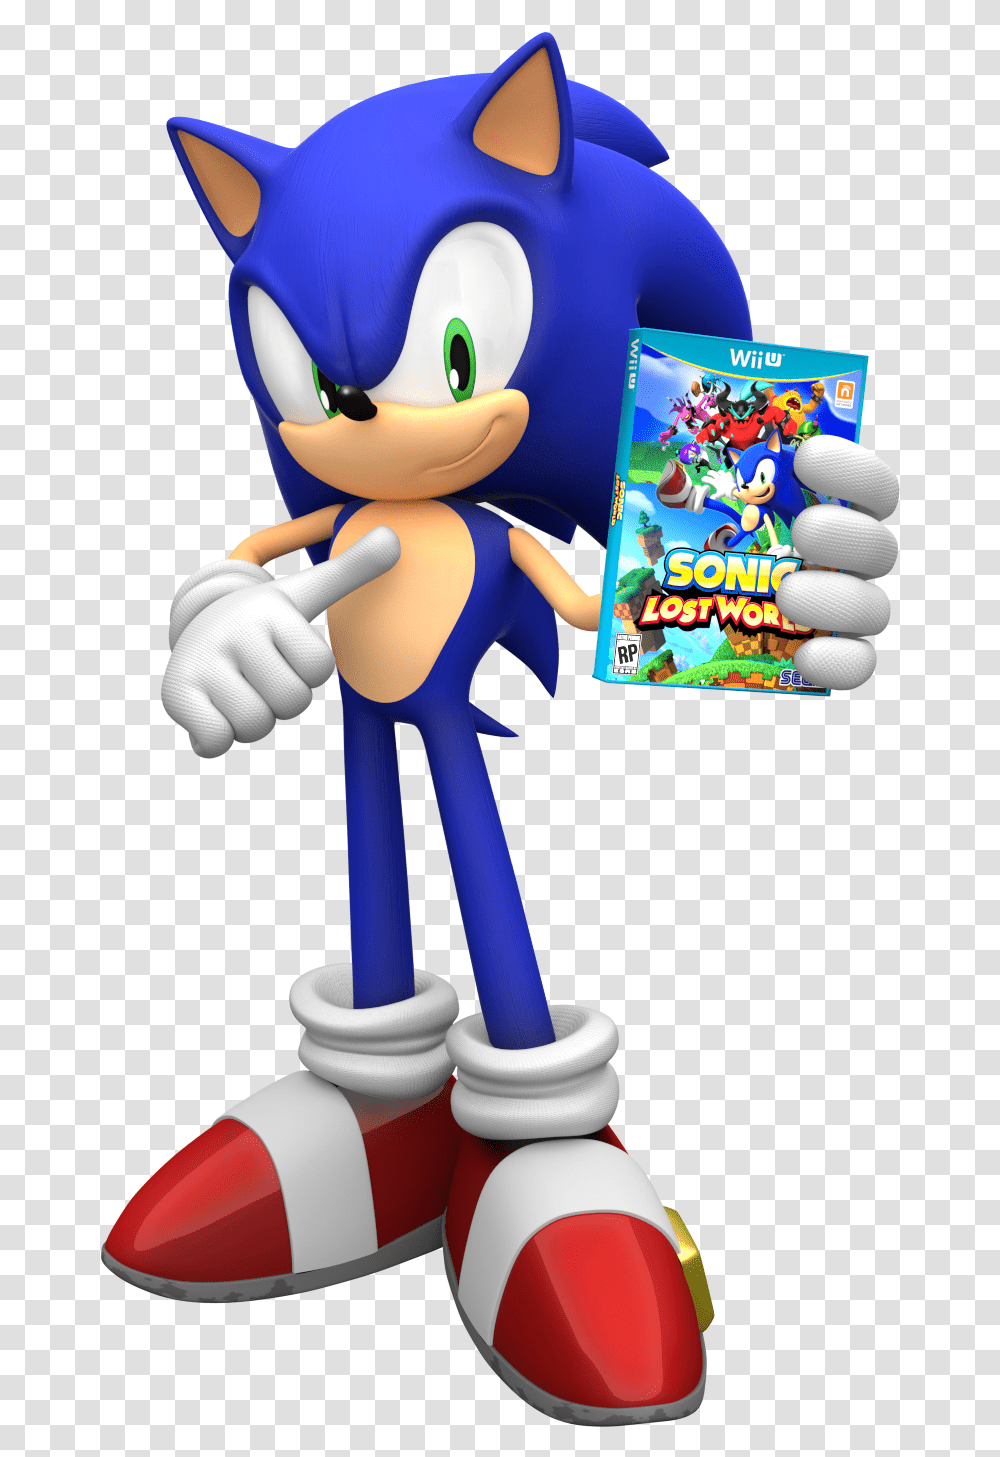 Sonic Lost World Wii U Game Disney Infinity Sonic The Hedgehog, Toy, Figurine, Super Mario Transparent Png